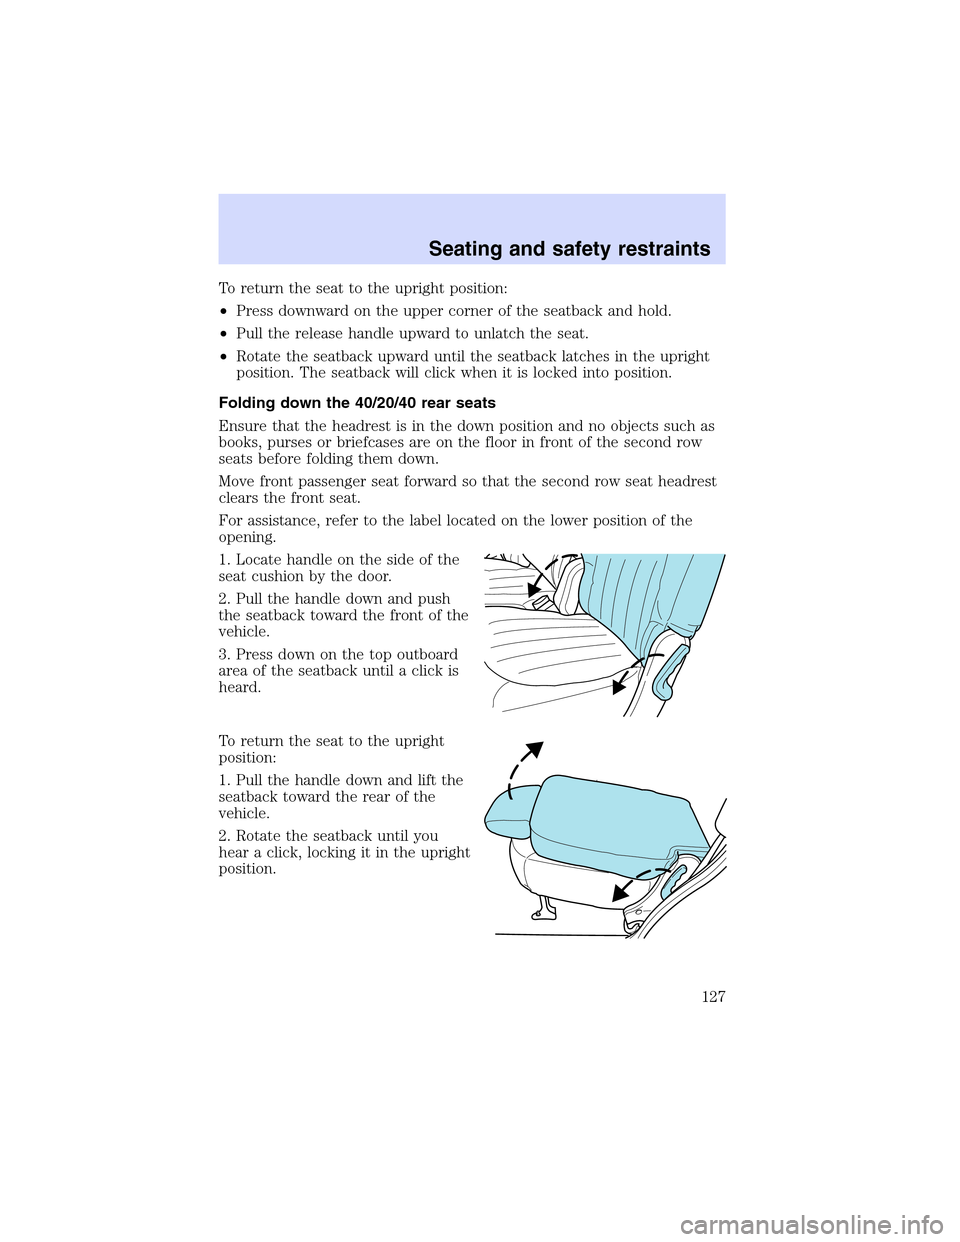 Mercury Mountaineer 2002  Owners Manuals To return the seat to the upright position:
•Press downward on the upper corner of the seatback and hold.
•Pull the release handle upward to unlatch the seat.
•Rotate the seatback upward until t